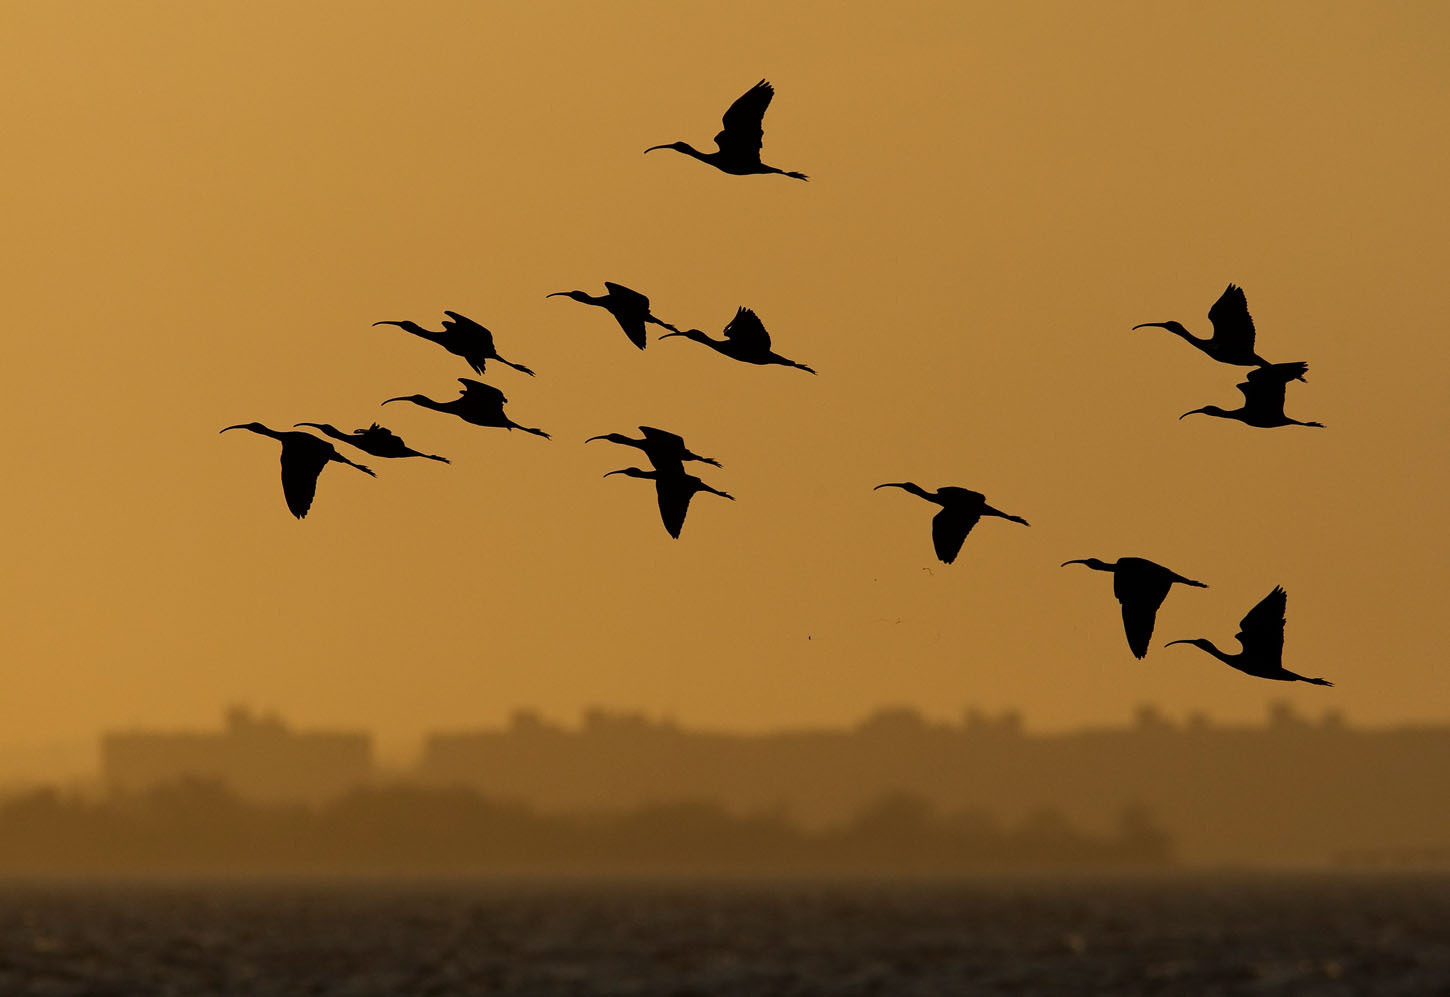 Glossy Ibis were among the first wading birds to breed in New York City in the 1970s, after many decades of absence. Photo: <a href="http://www.fotoportmann.com/" target="_blank" >François Portmann</a>